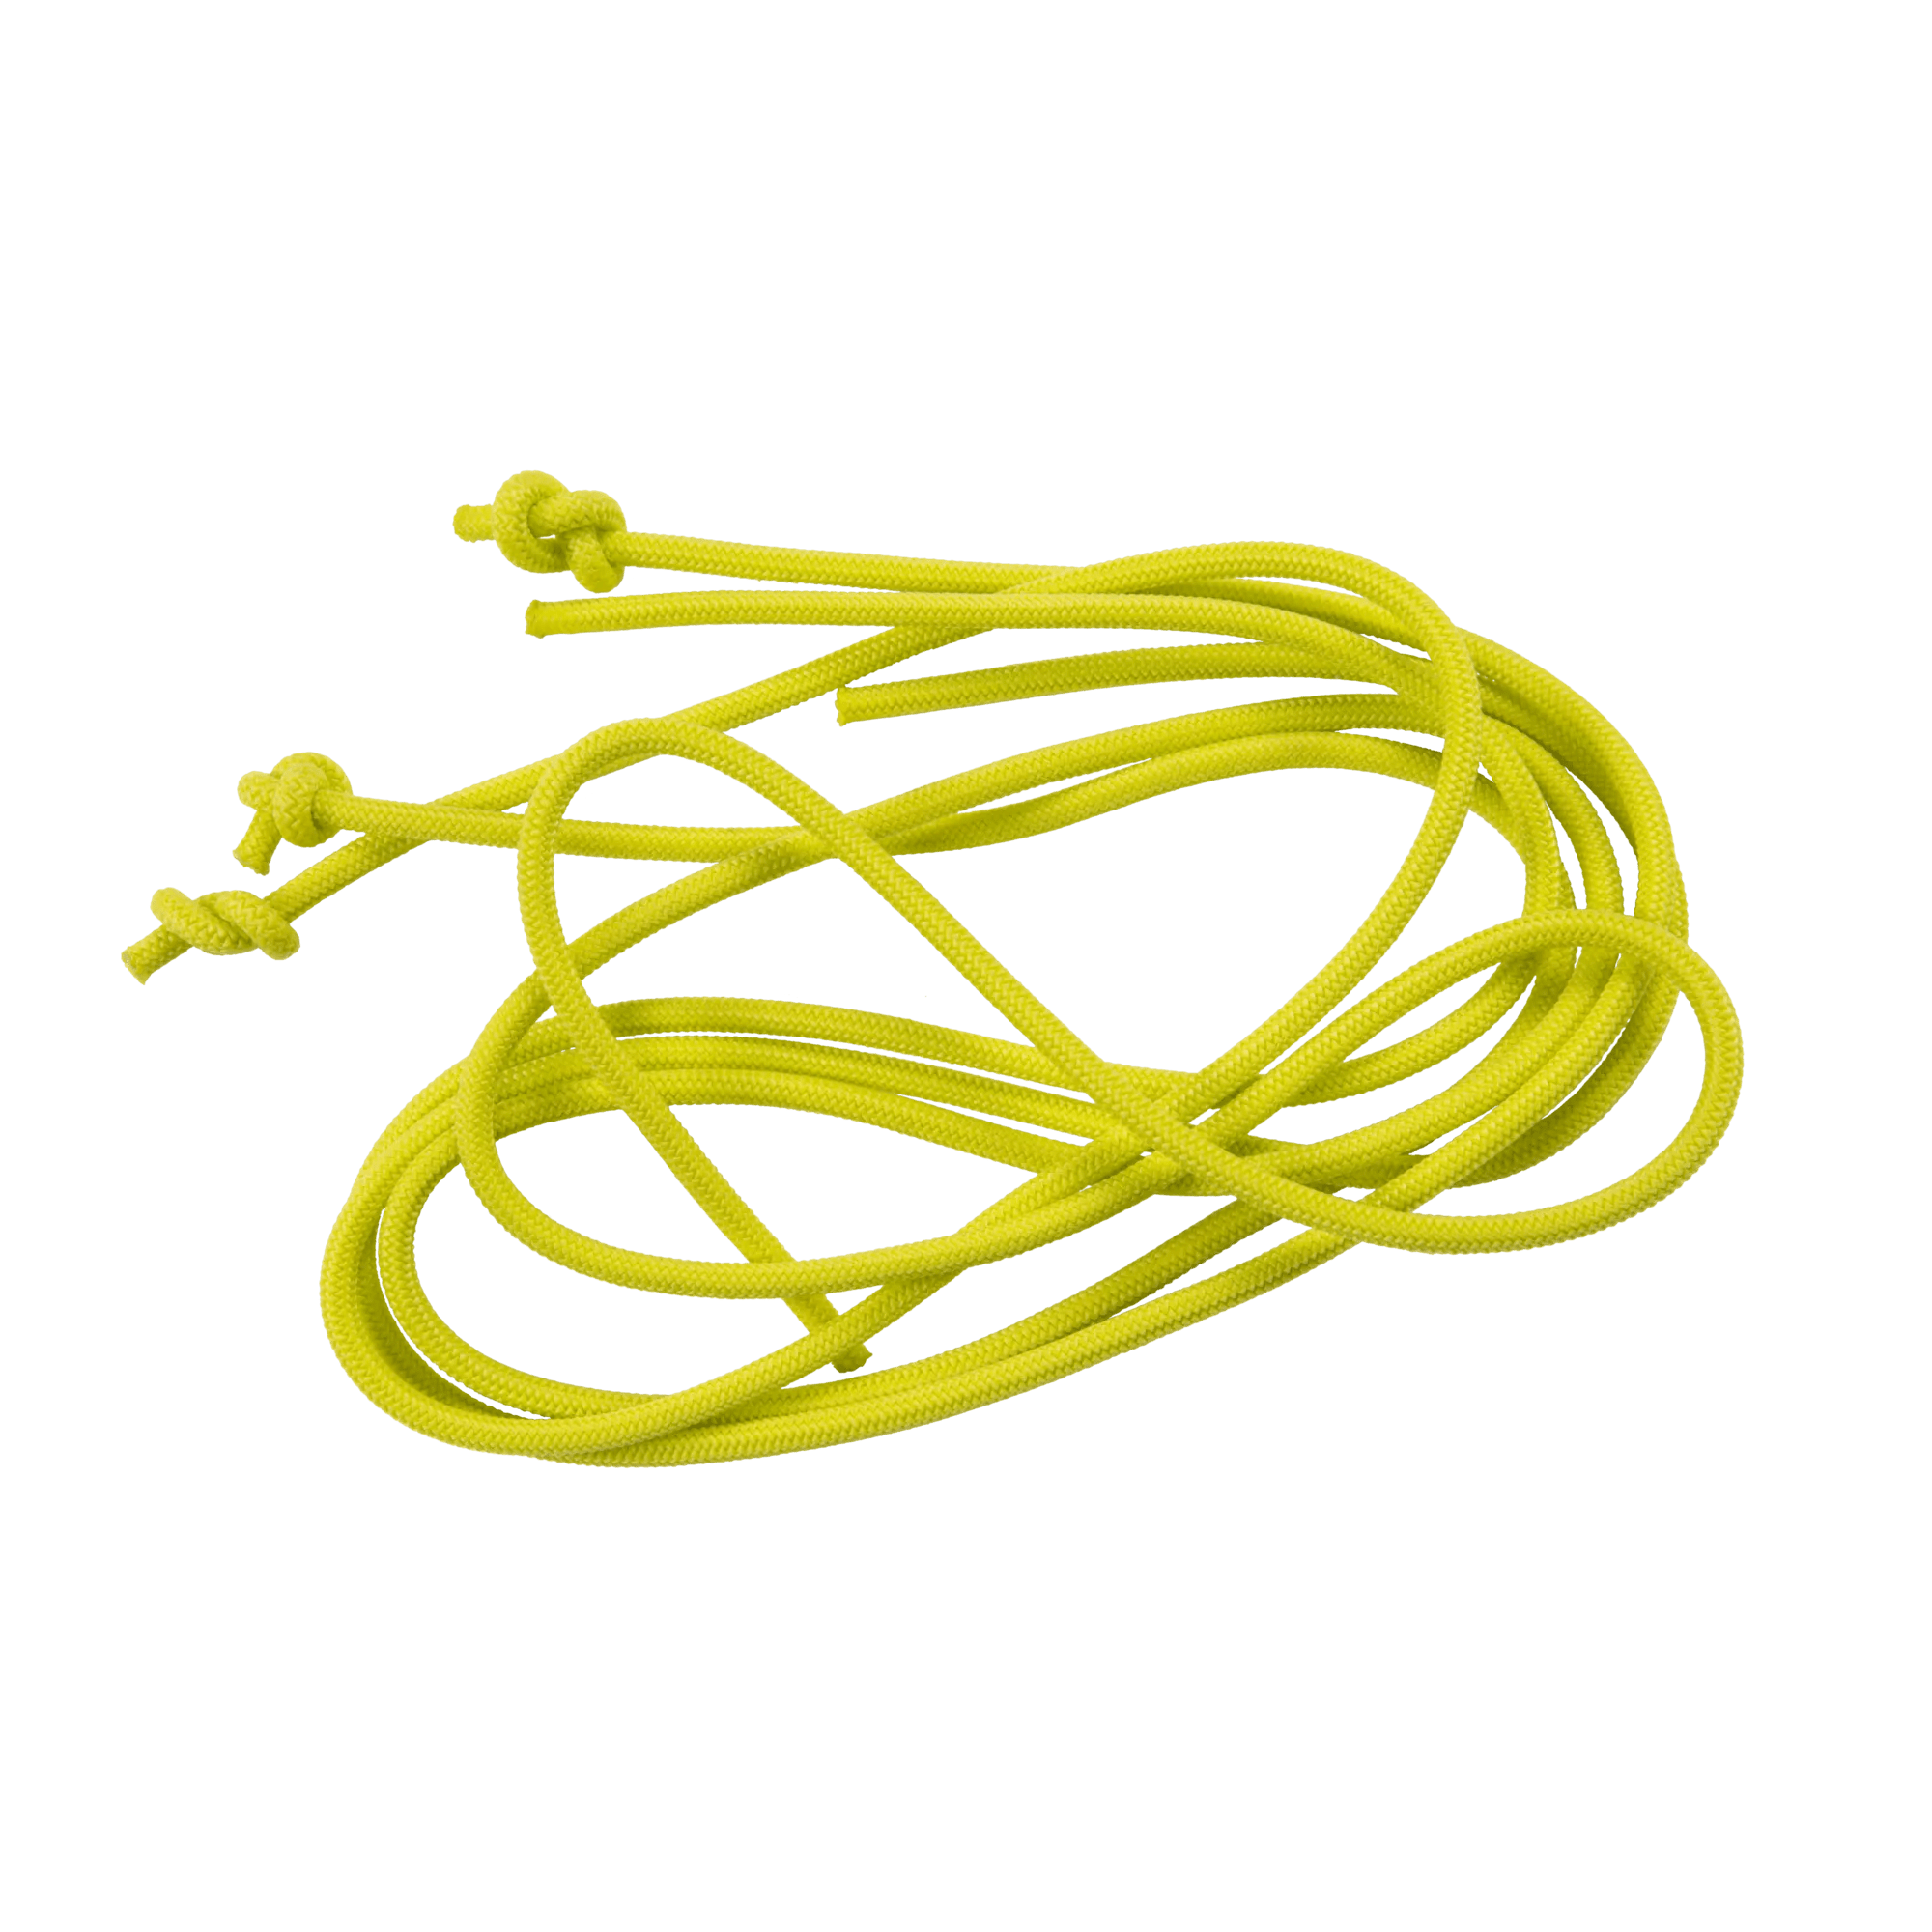 PELICAN - Yellow Green Bungee Cord Deck Rigging Kit - Yellow - PS1610 - ISO